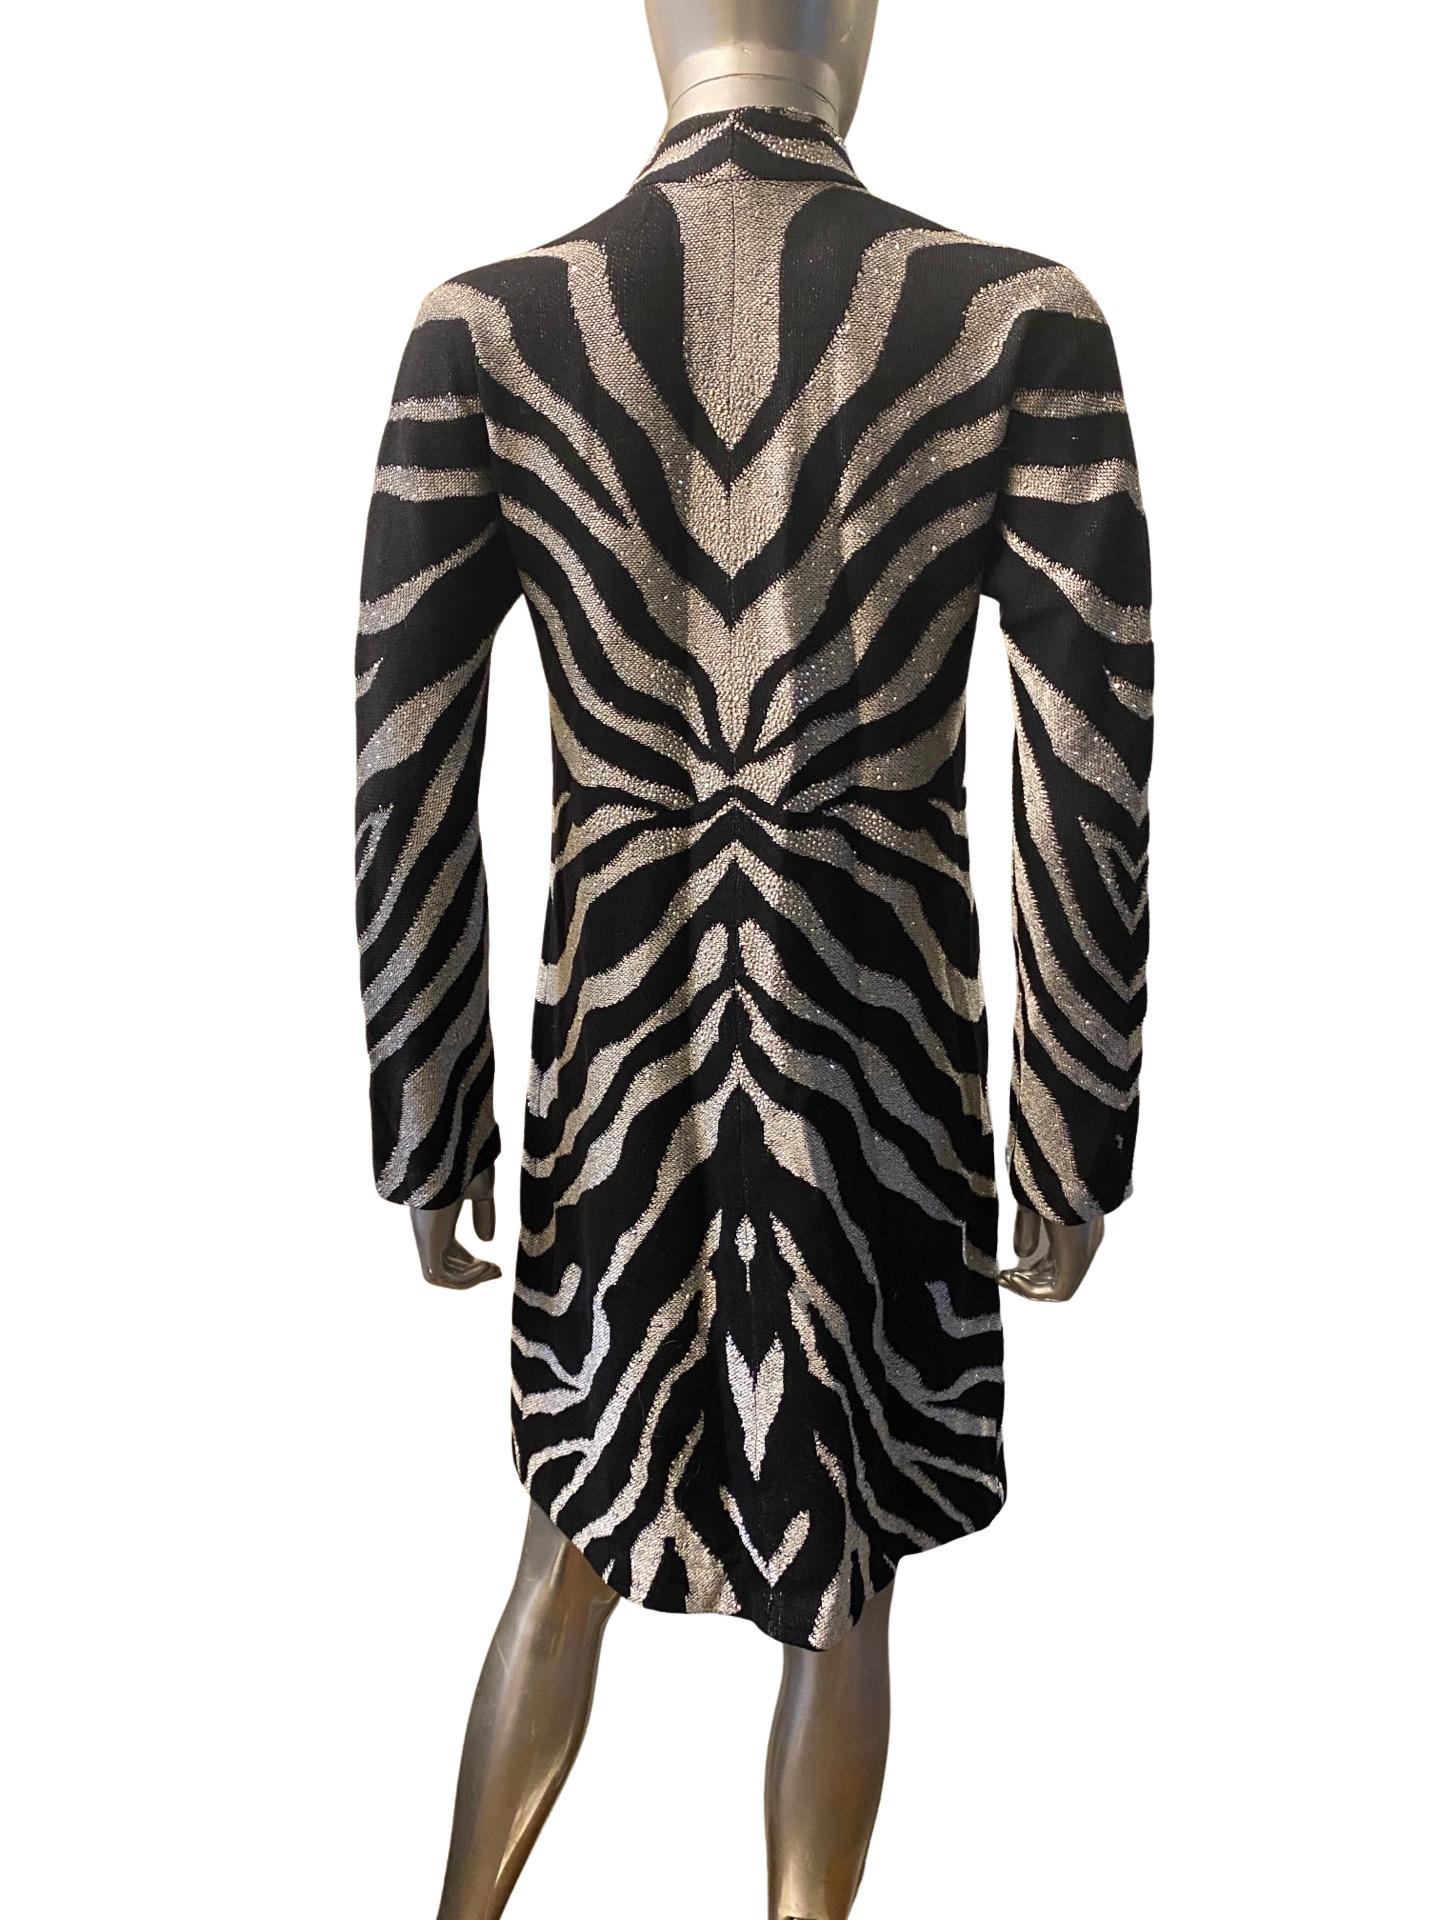 St John Evening Zebra Knit Zip Front Dress with Silver Beading Size 2 NWT For Sale 3